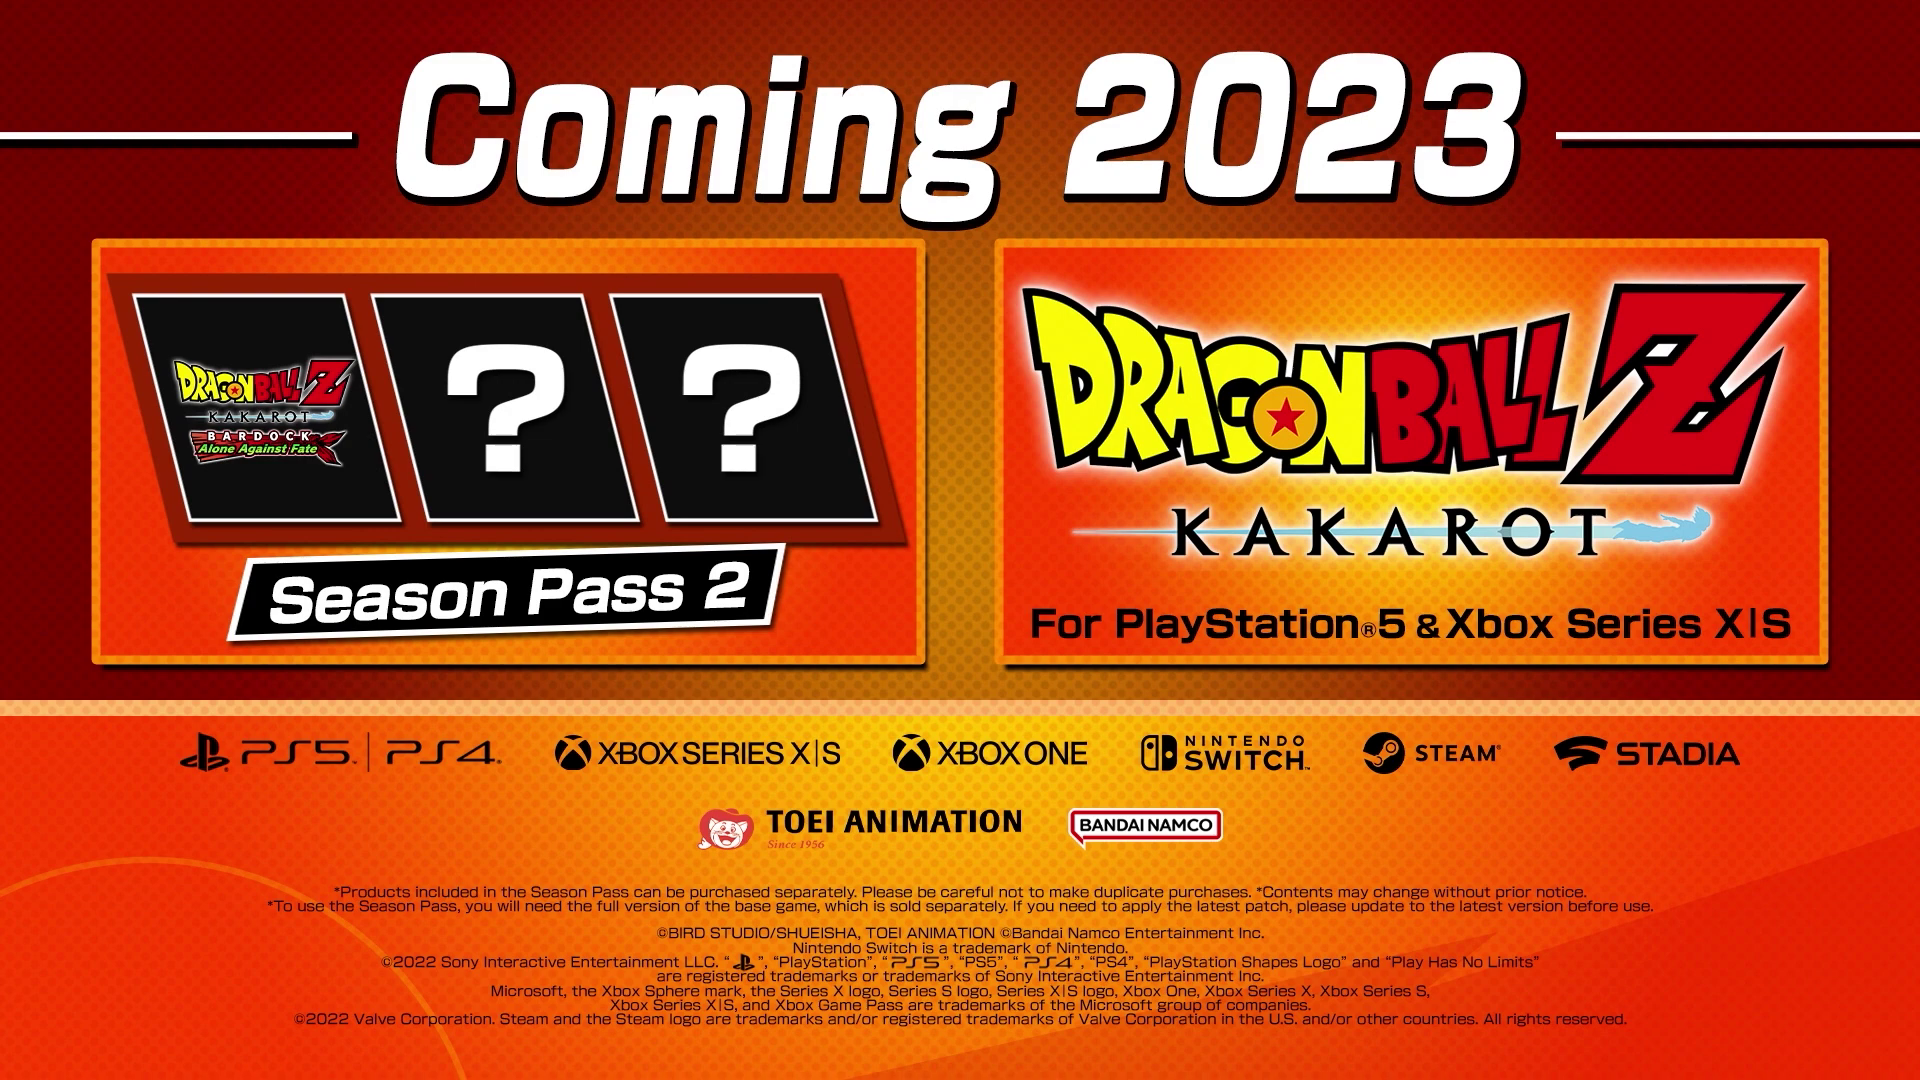 News | "Dragon Ball Z: to Receive Second Season Pass + Native PlayStation 5 and Series Versions in 2023